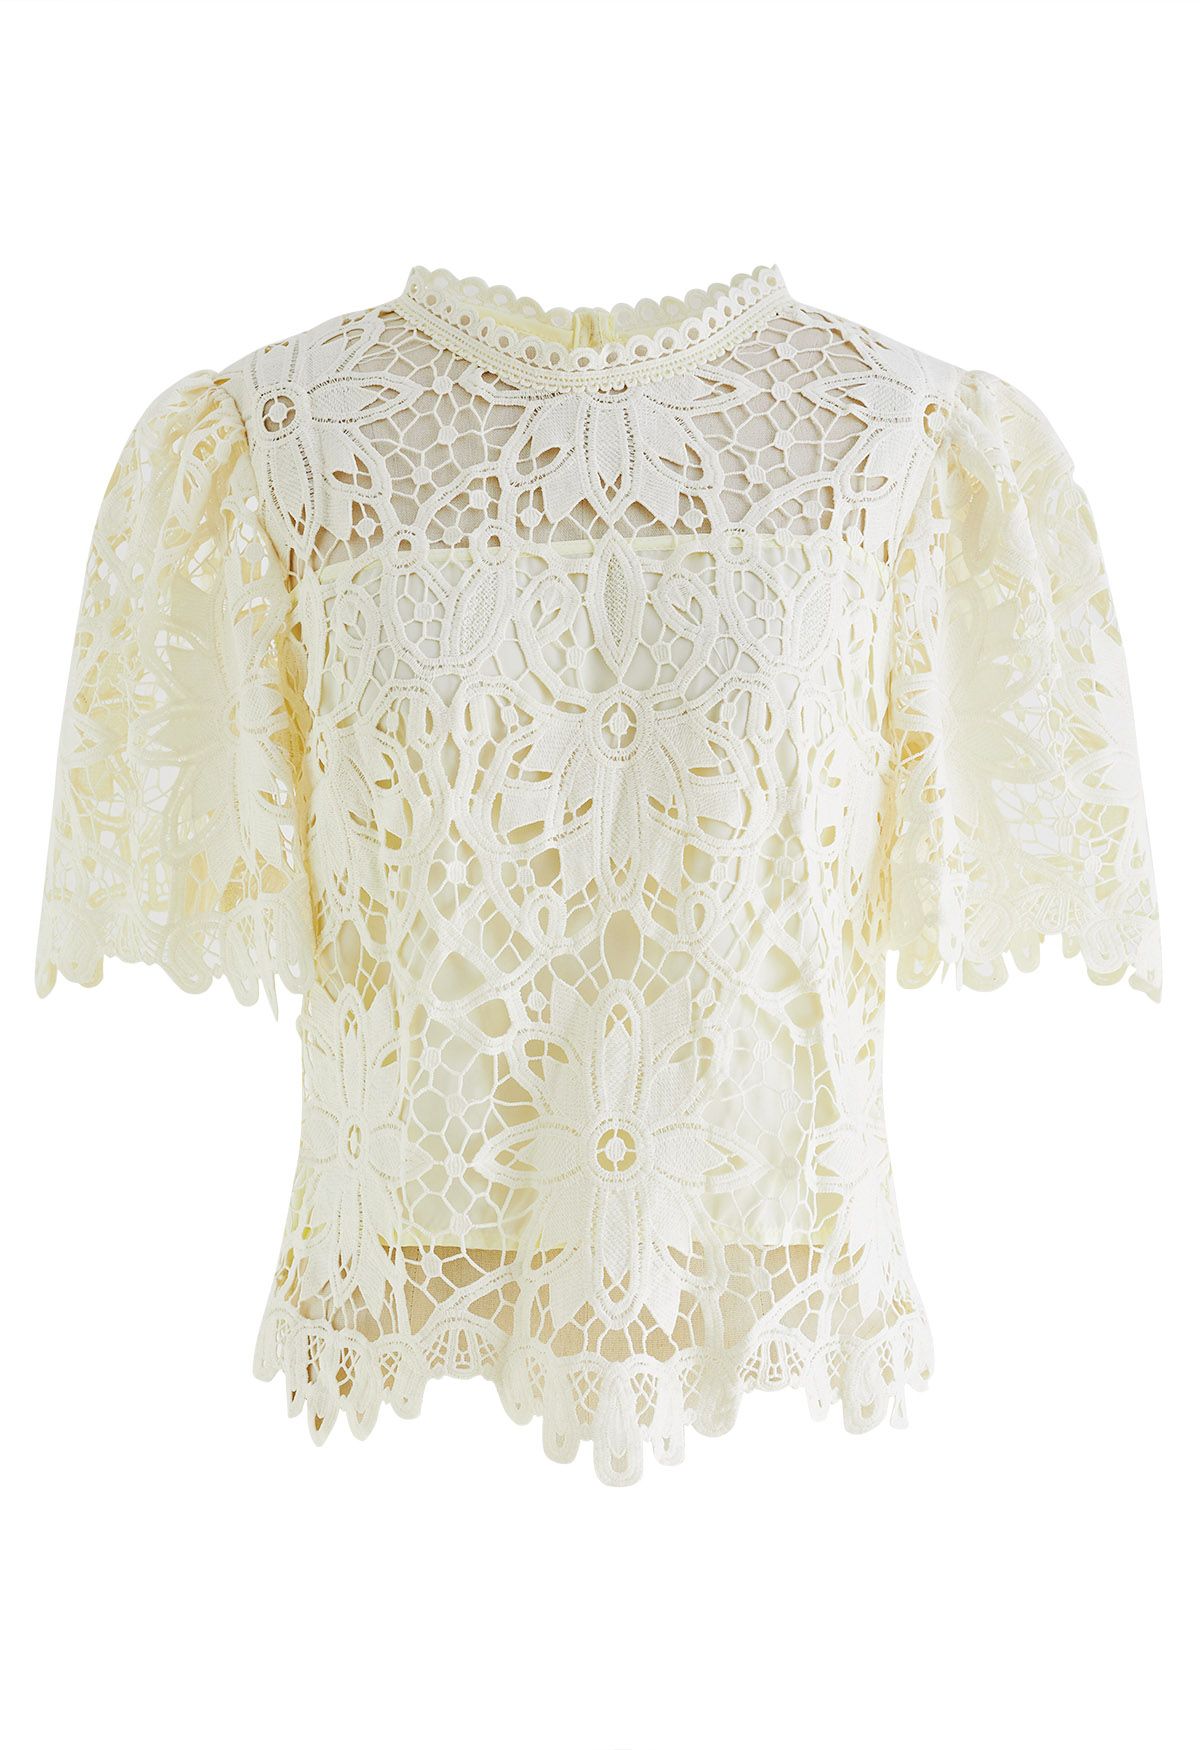 Floral Crochet Lace Top (Ivory)